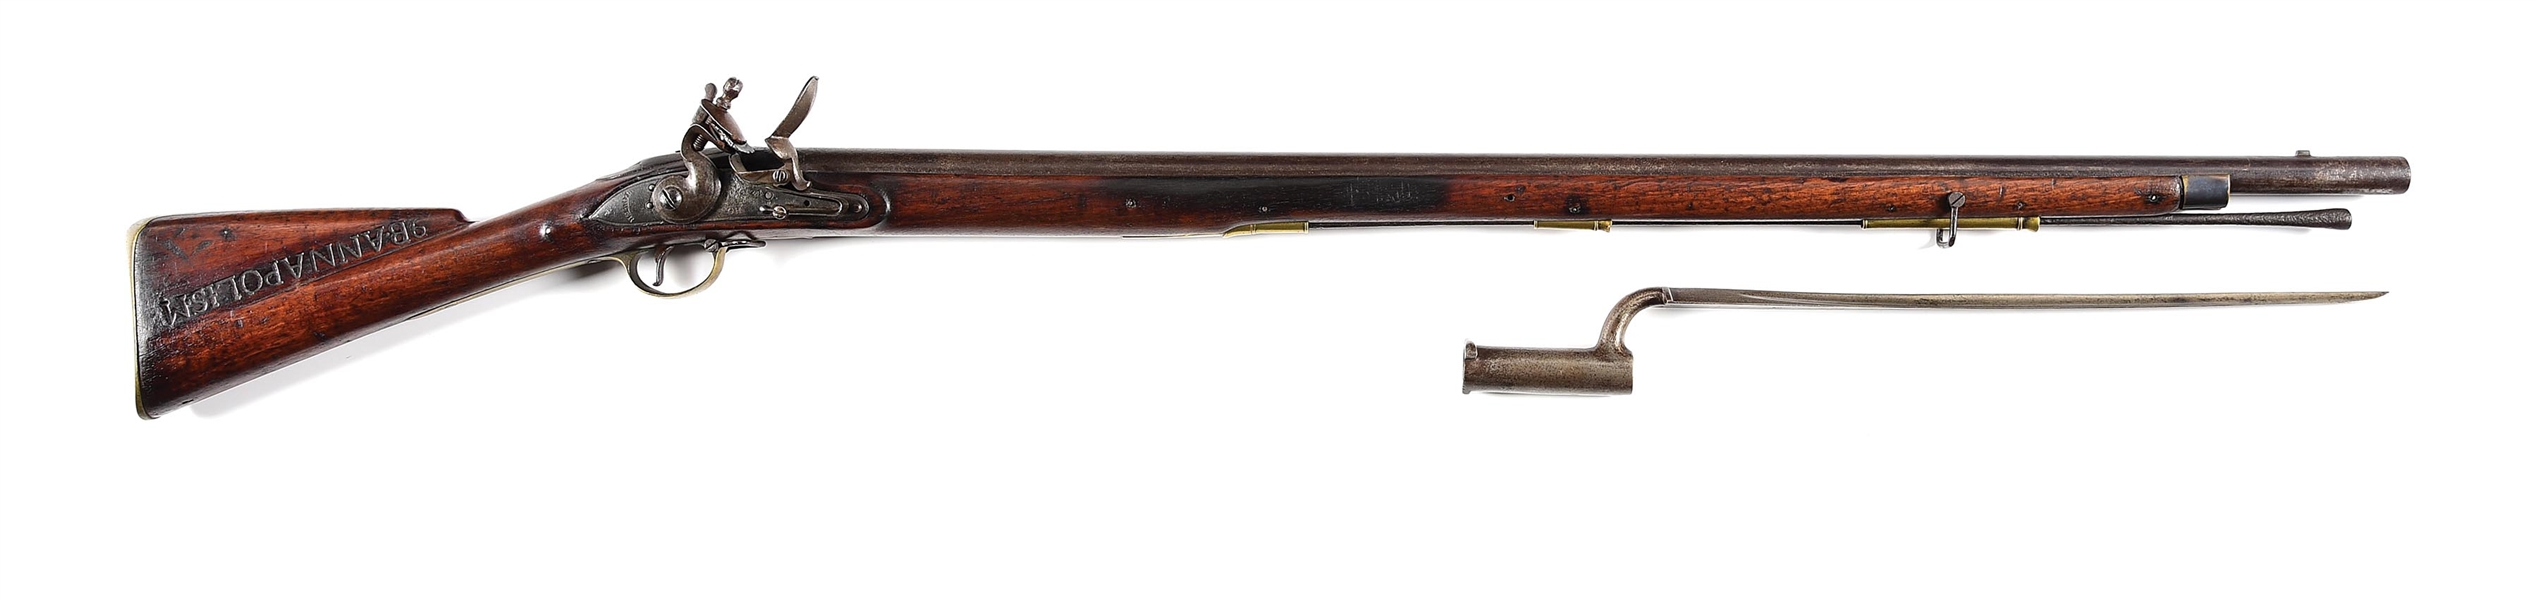 (A) BRITISH 3RD MODEL BROWN BESS MUSKET WITH CANADIAN MILITIA BRAND AND BAYONET.